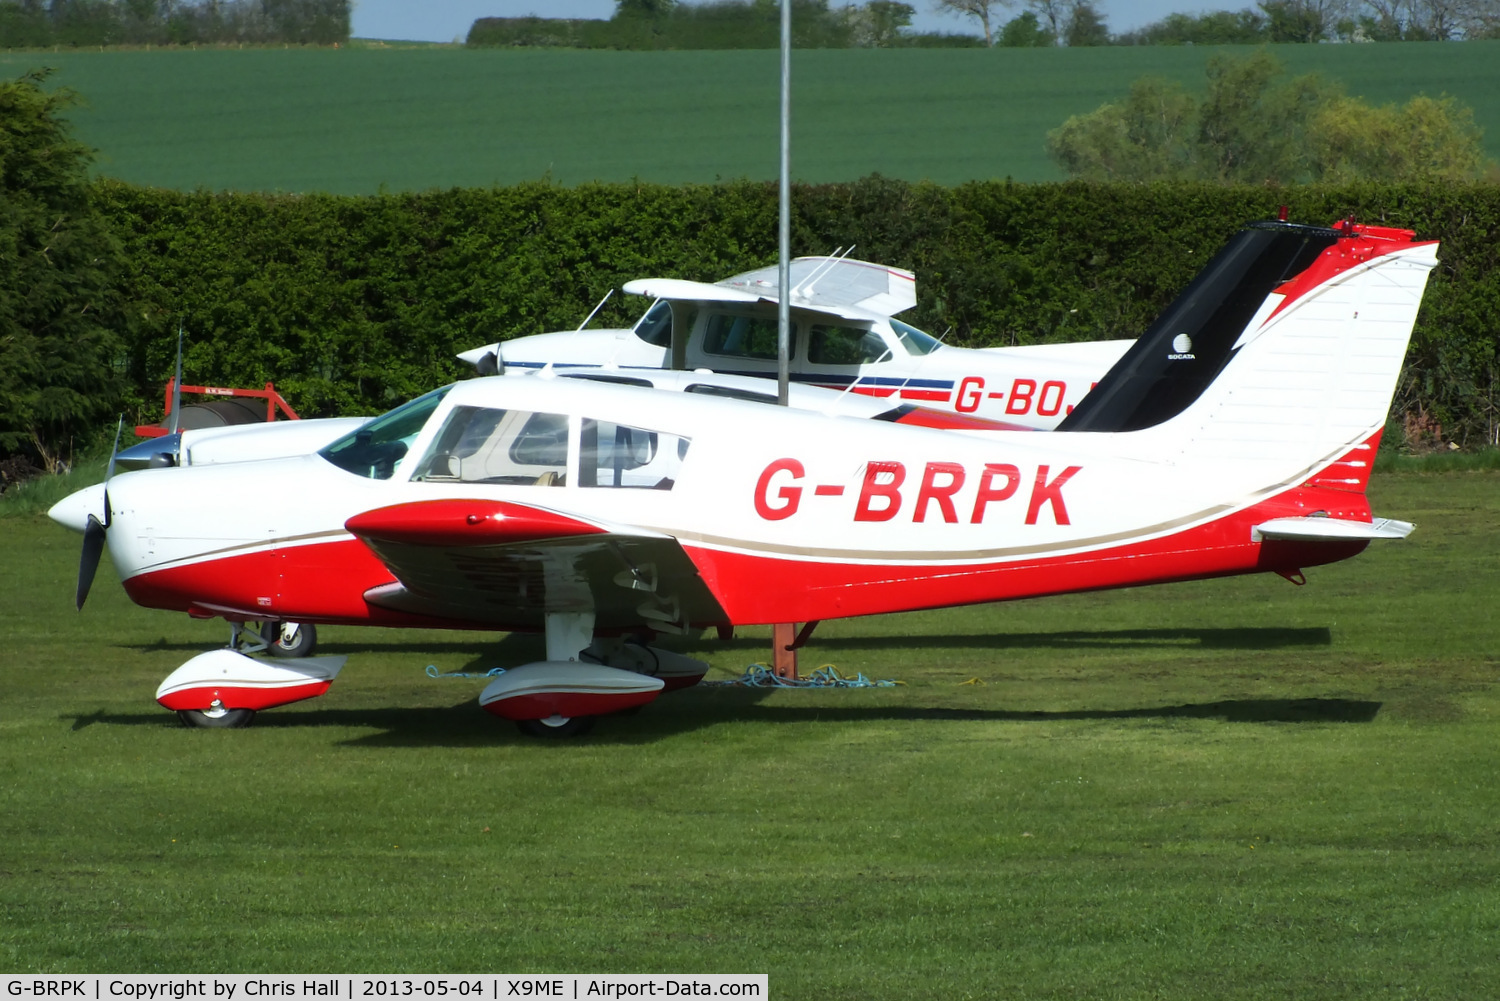 G-BRPK, 1972 Piper PA-28-140 Cherokee C/N 28-7325070, at Meppershall Airfield, Bedfordshire